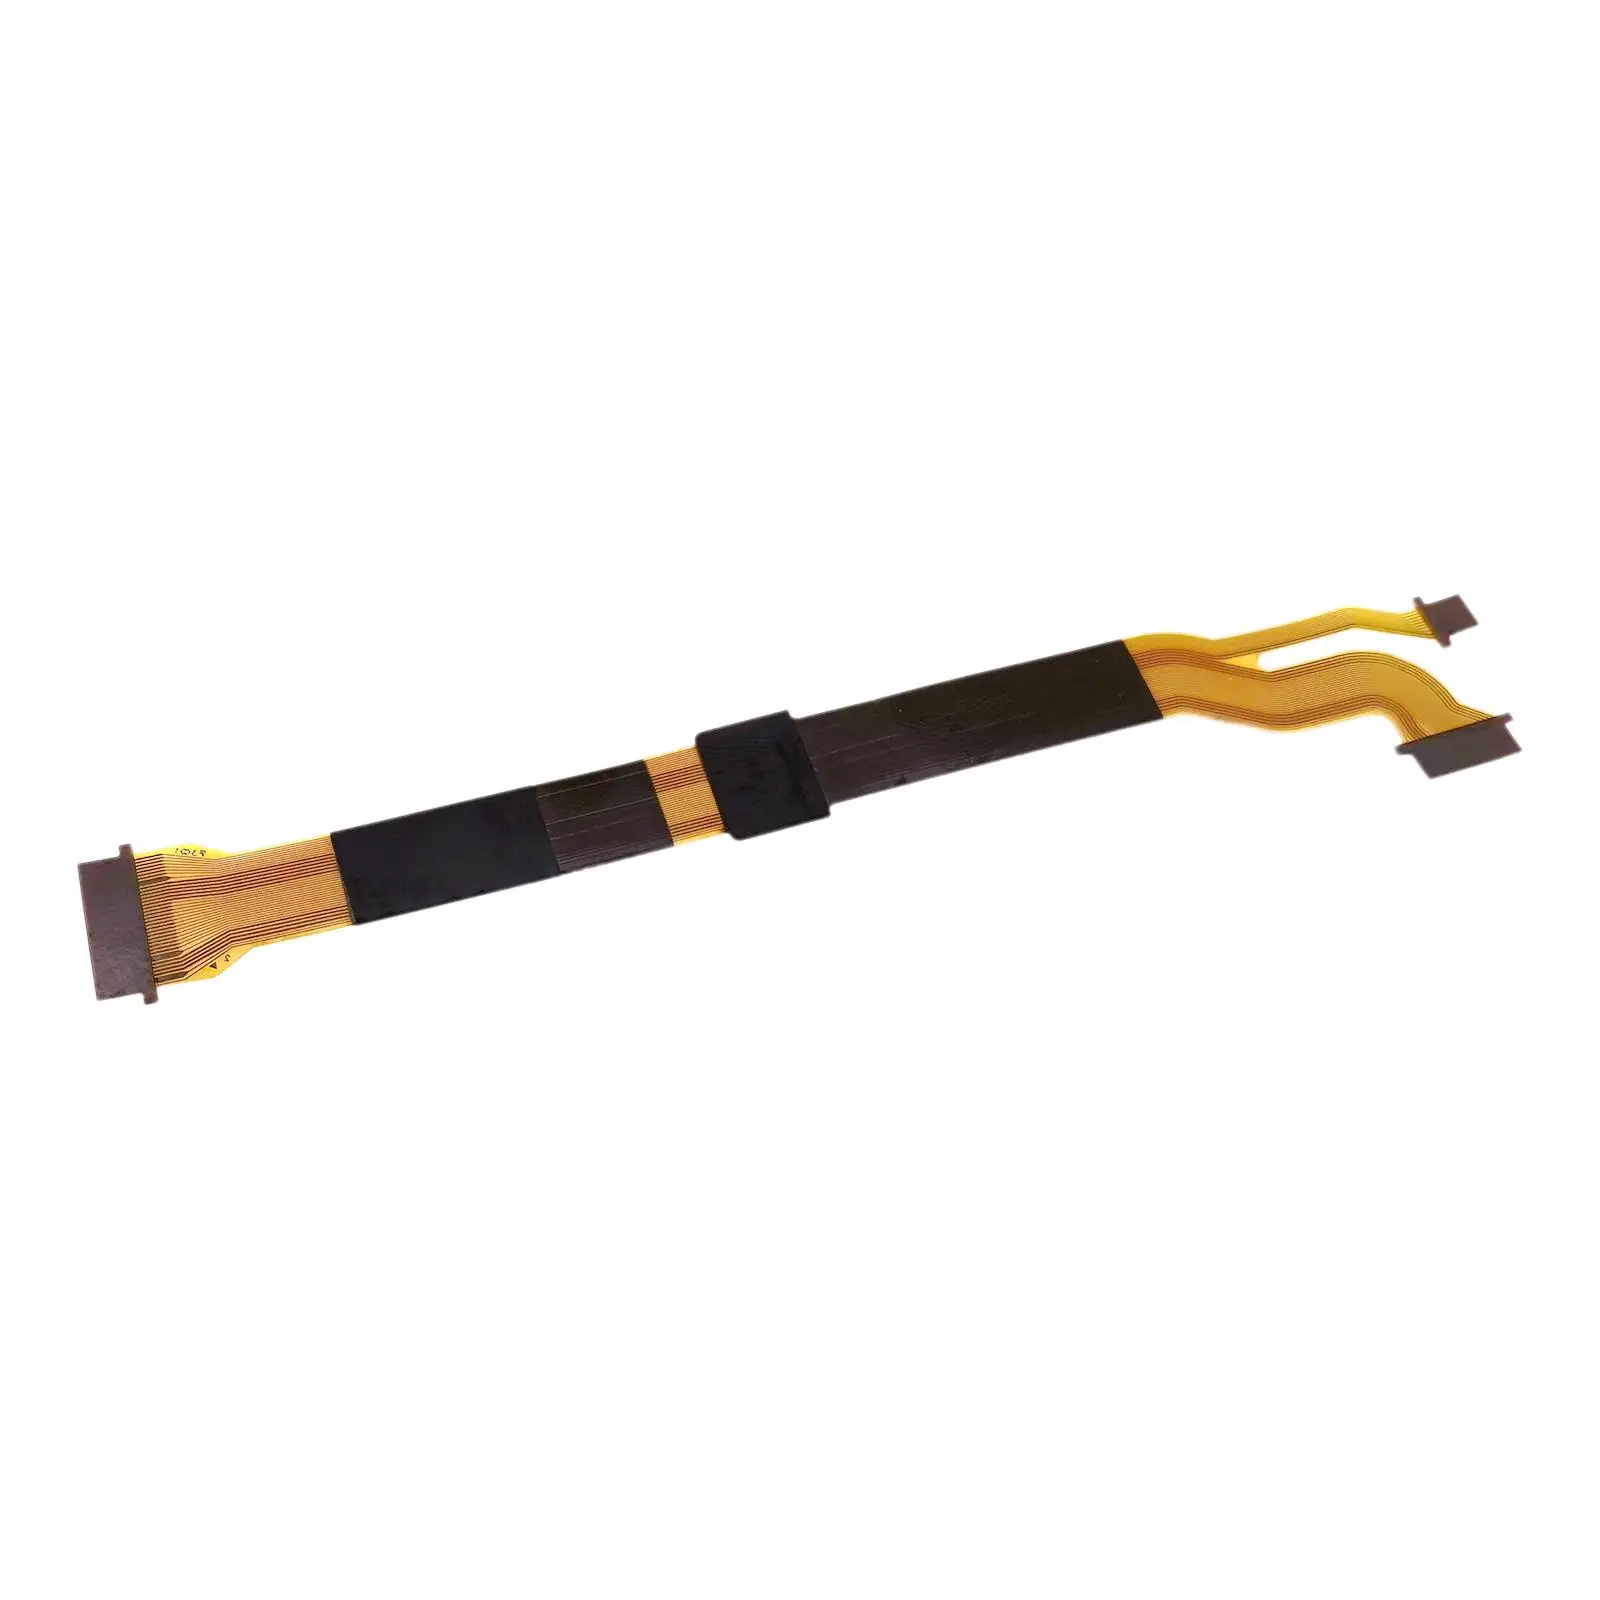 Lens Anti SHAKE Flex Cable Attachment Professional Easy to Install Replaces Stable Performance Brass Accessories for E 55-210 mm